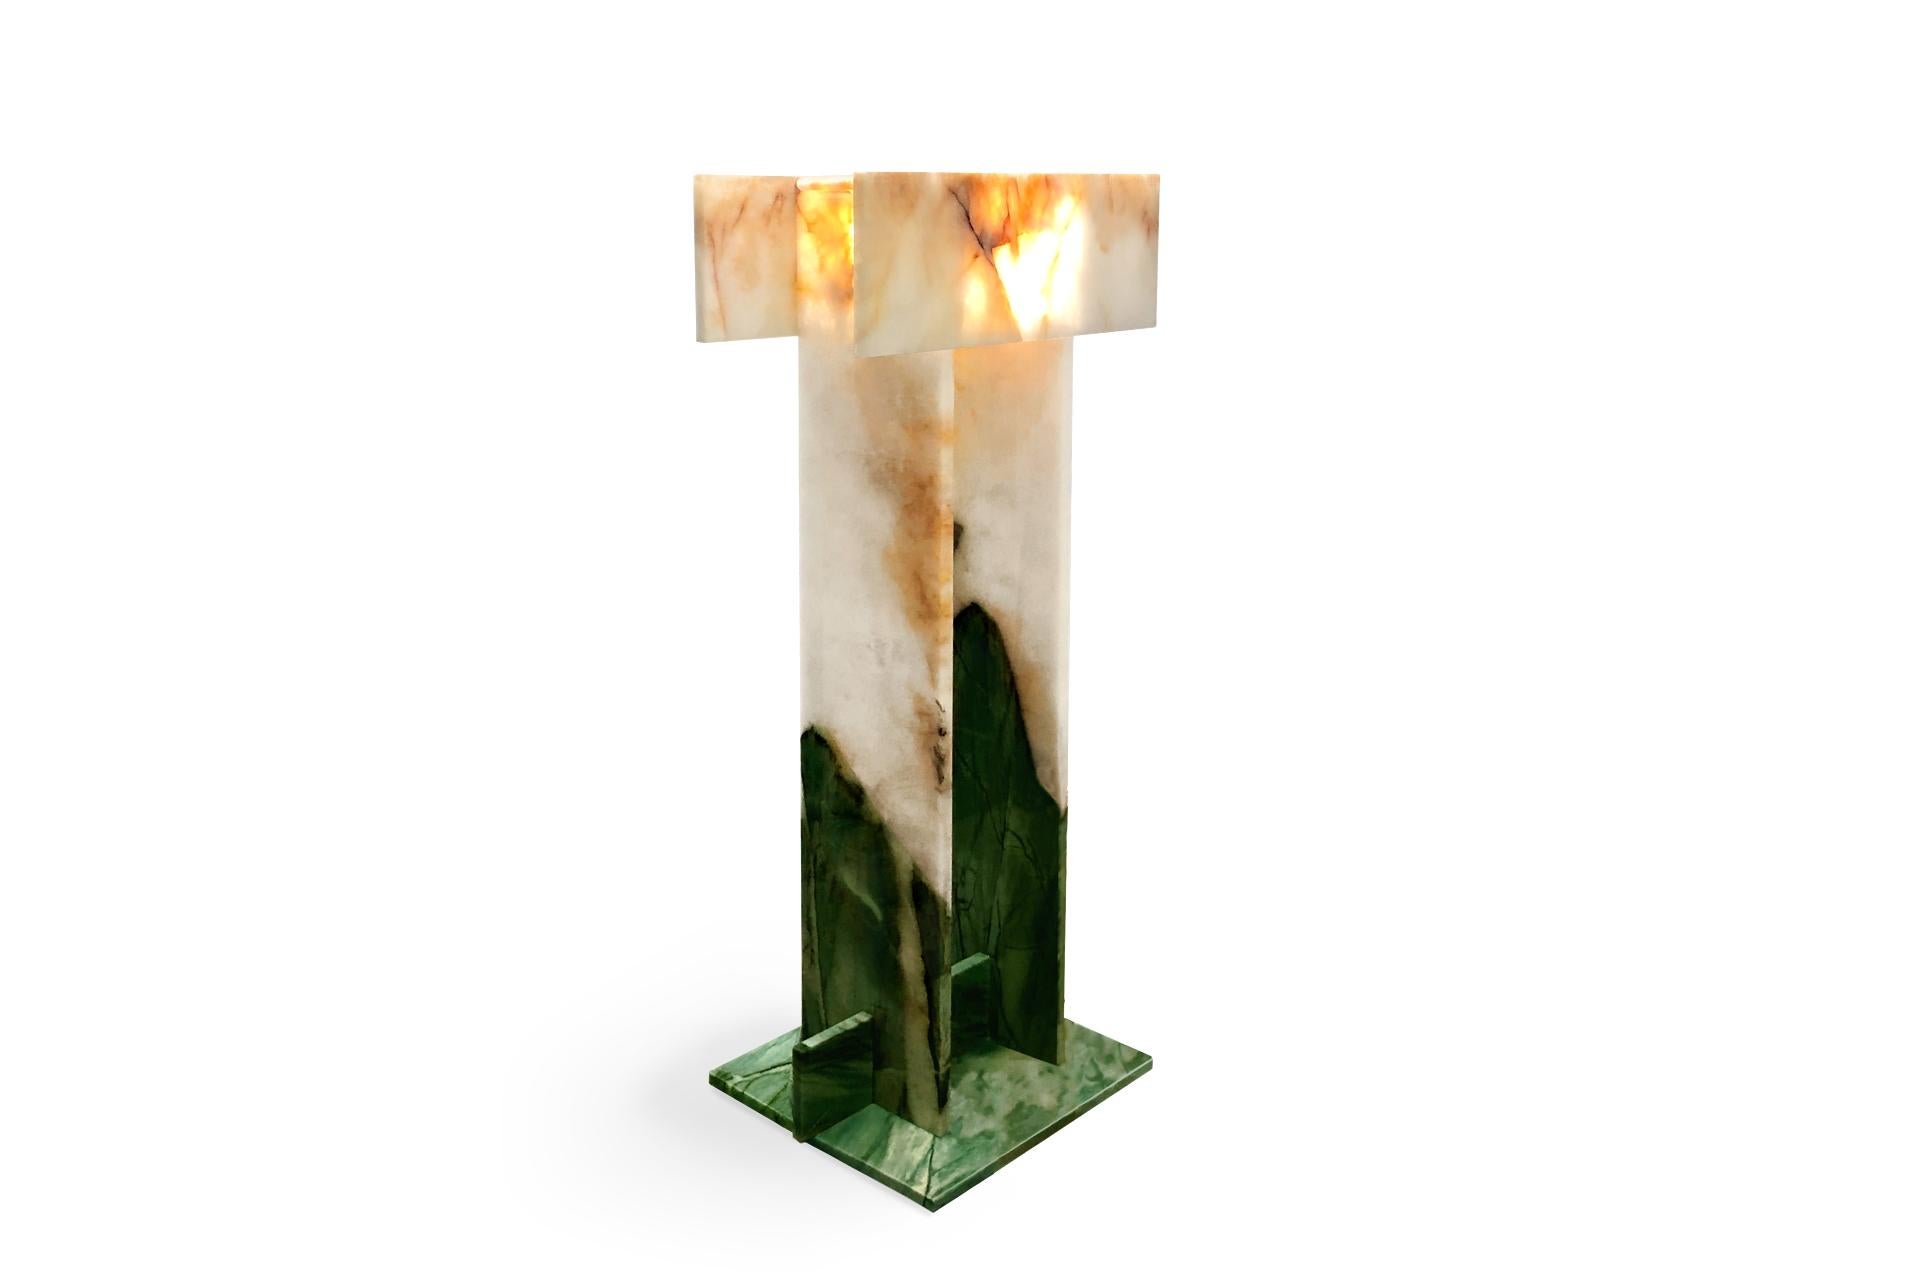 This is Pedrita floor lamp (Model S) and it is part of Pedrita lamp series.
This floor lamp is made of a rare quartzite of unique geological formation. 

Pedrita lamp series’ concept is based on an experimentation of Brazilian stones: quartzites and